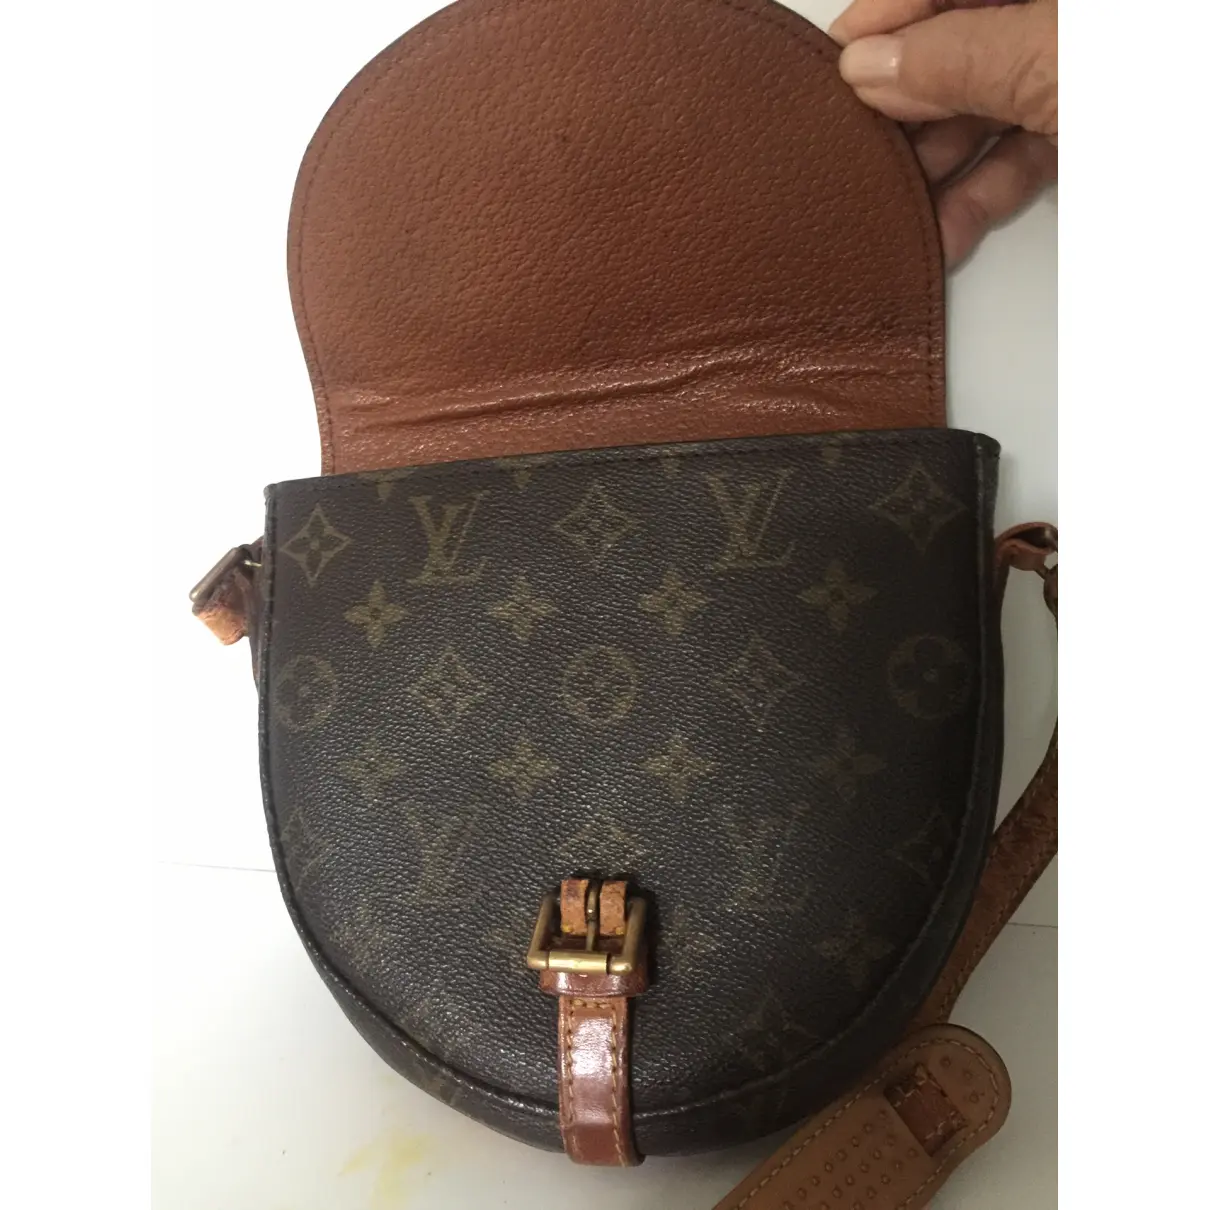 Buy Louis Vuitton Chantilly leather crossbody bag online